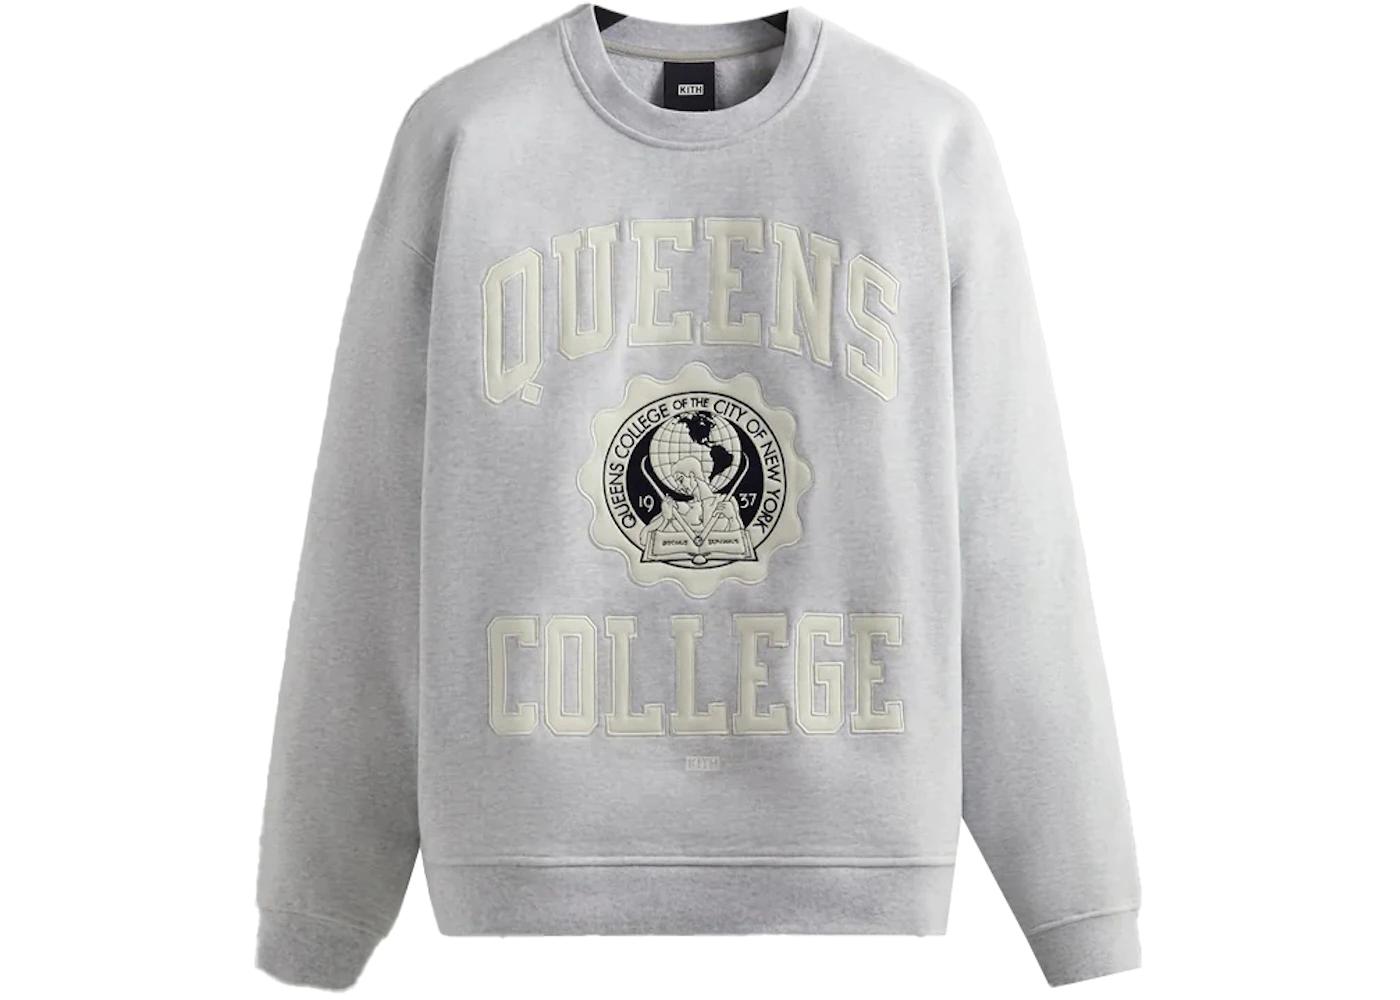 Russell Athletic CUNY Queens College Crewneck Light Heather Grey by KITH